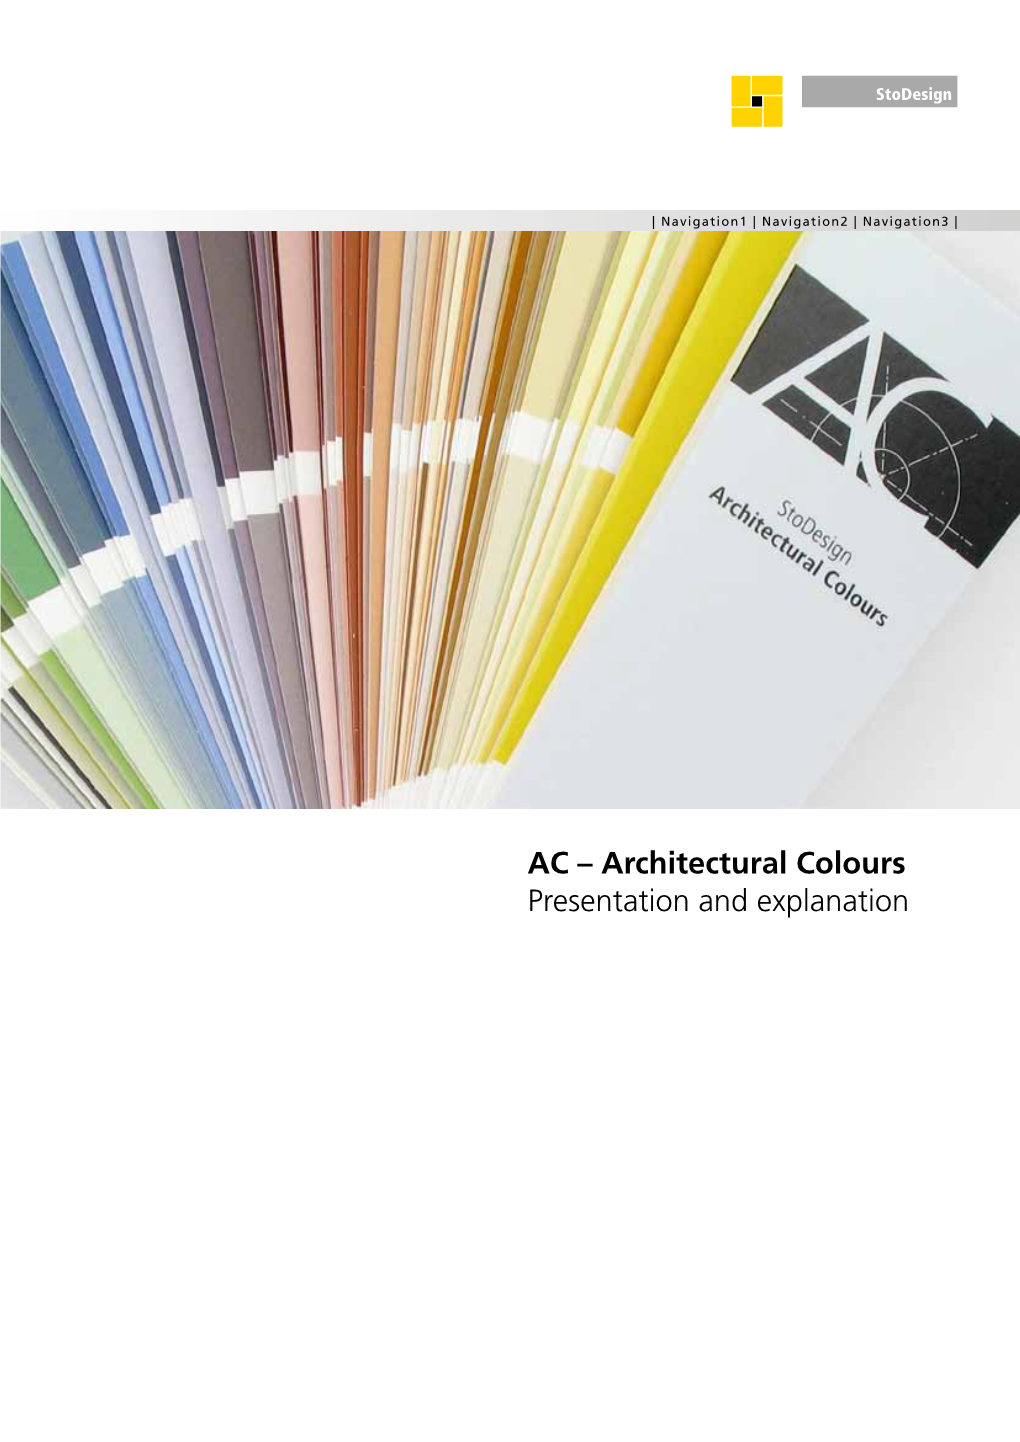 Architectural Colours Presentation and Explanation